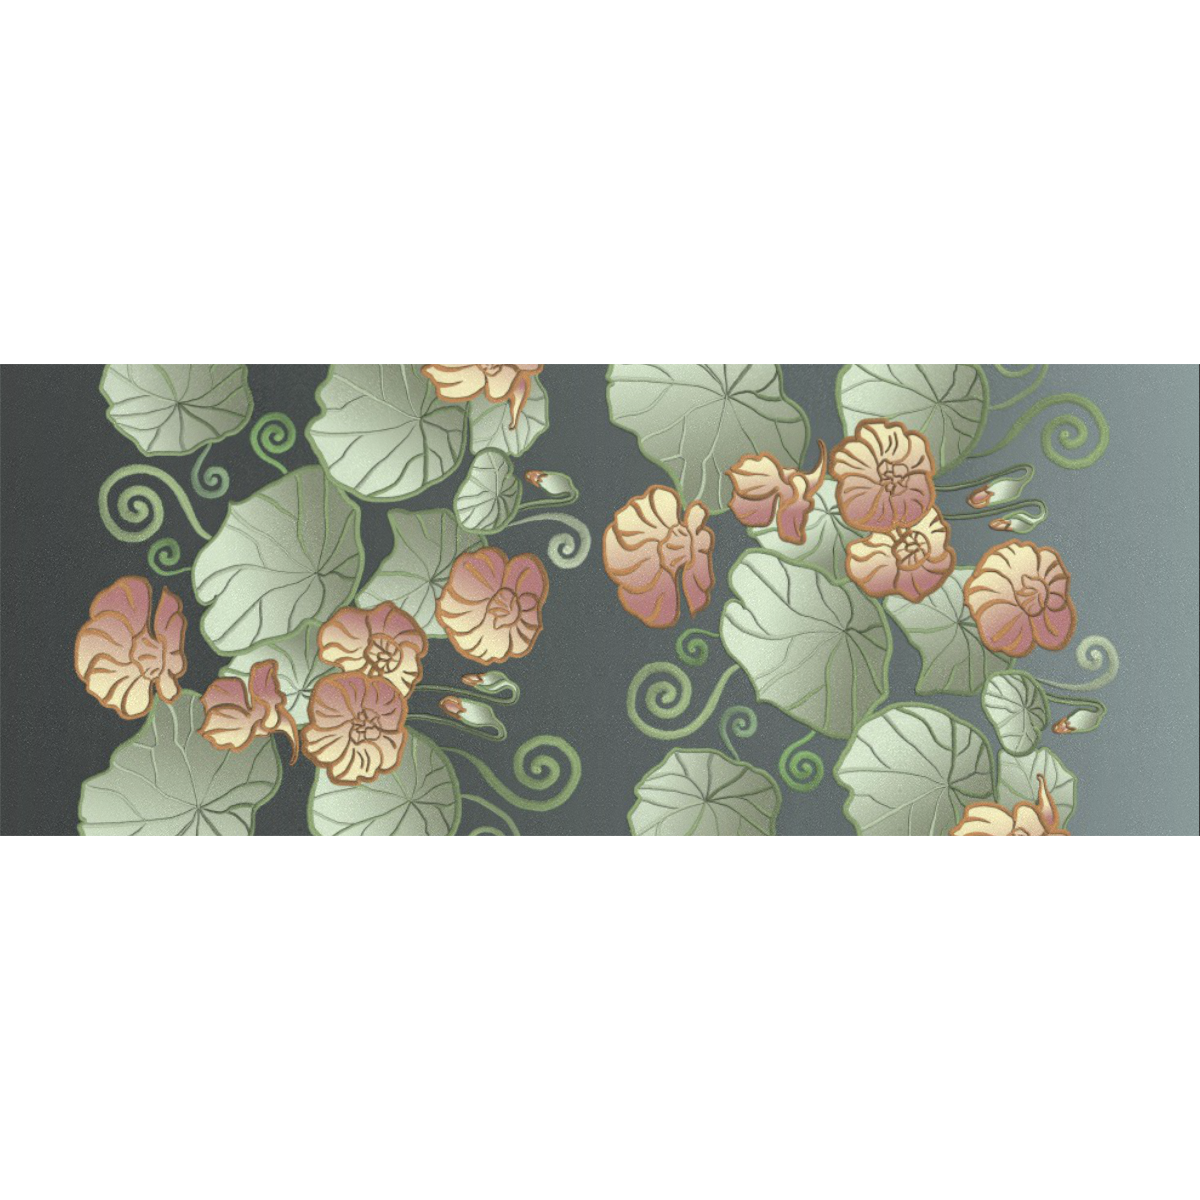 Floral Art Nouveau Gift Wrapping Paper 58"x 23" (5 Rolls)